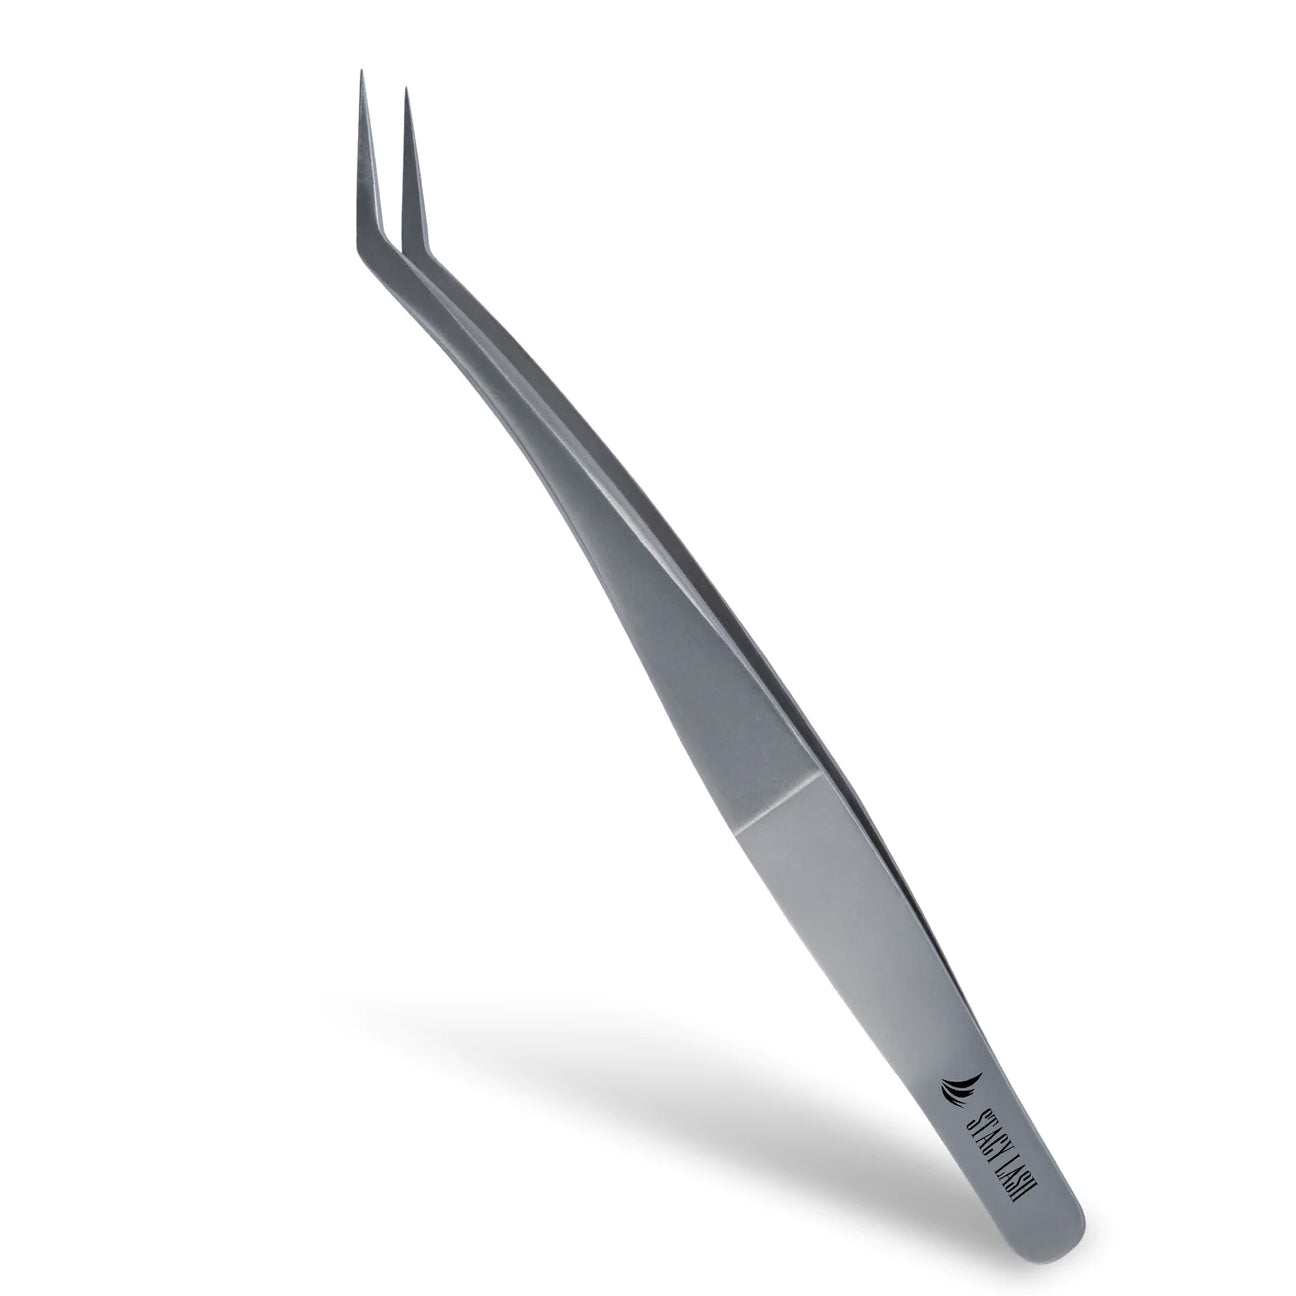 Stacy Lash STL-11 Curved L-Shaped Multifunctional Tweezers for Eyelash Extensions